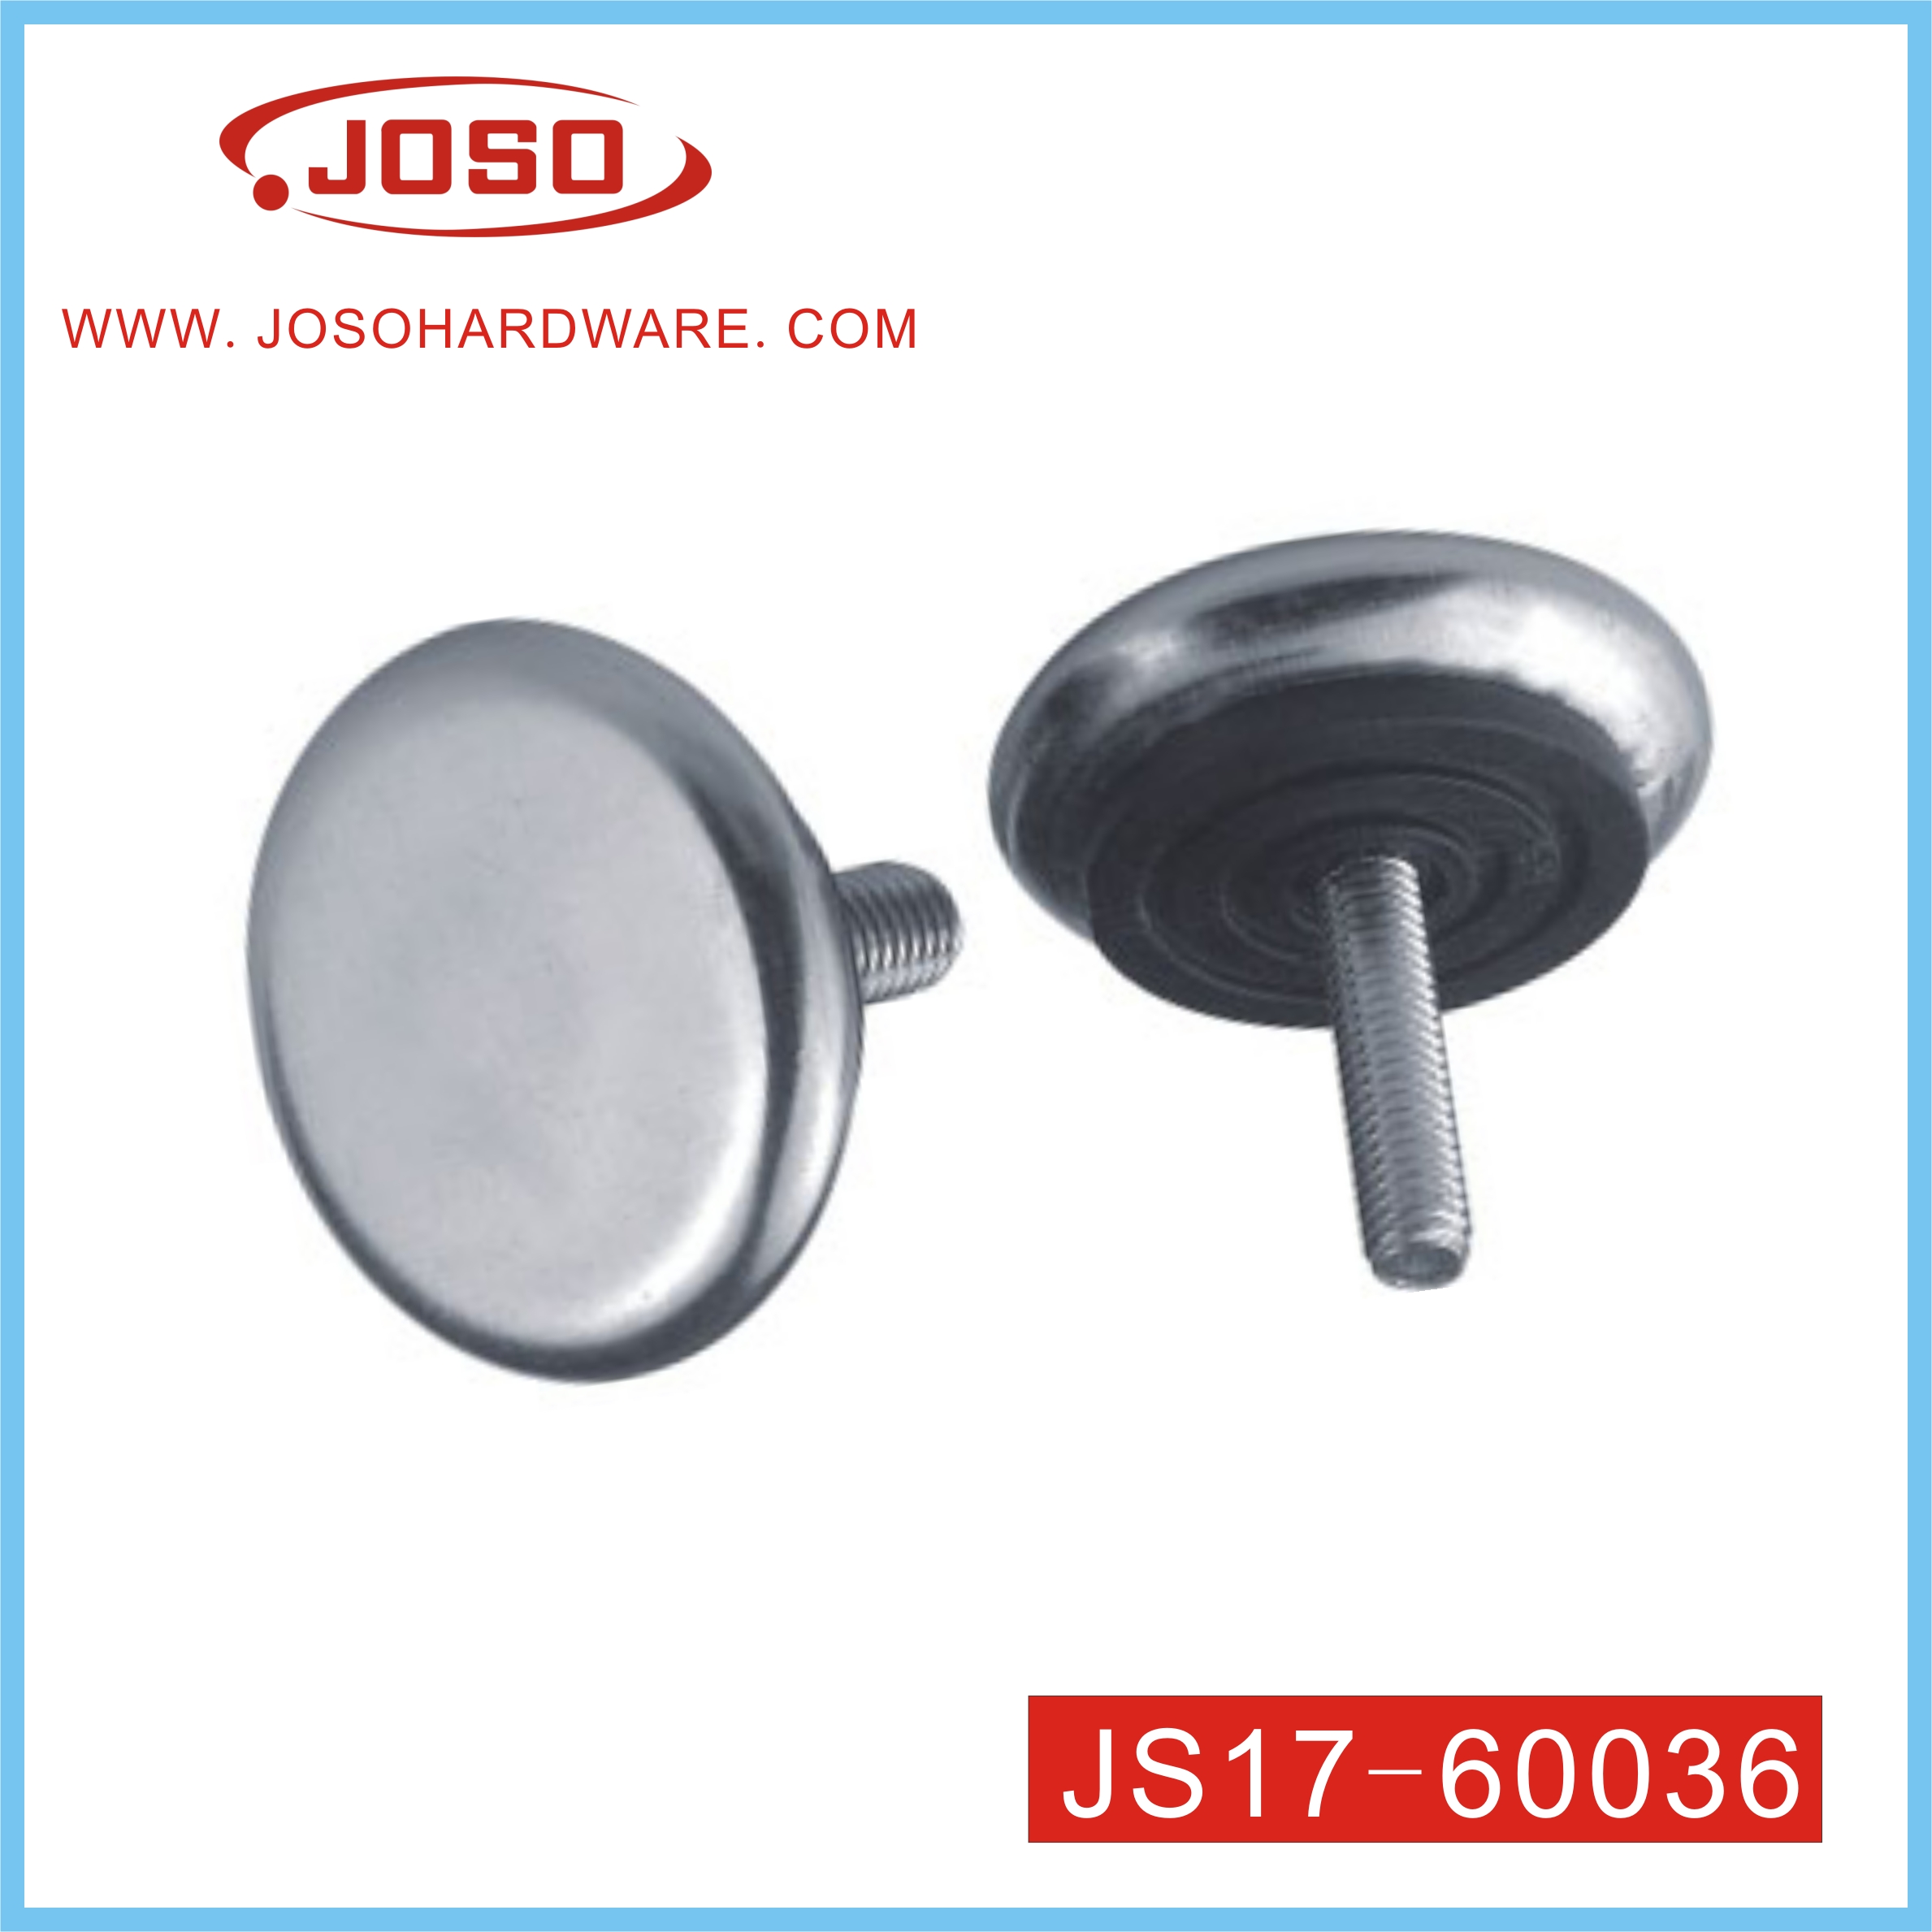 White Metal with Plastic Adjustable Screw of Hardware for Sofa Leg